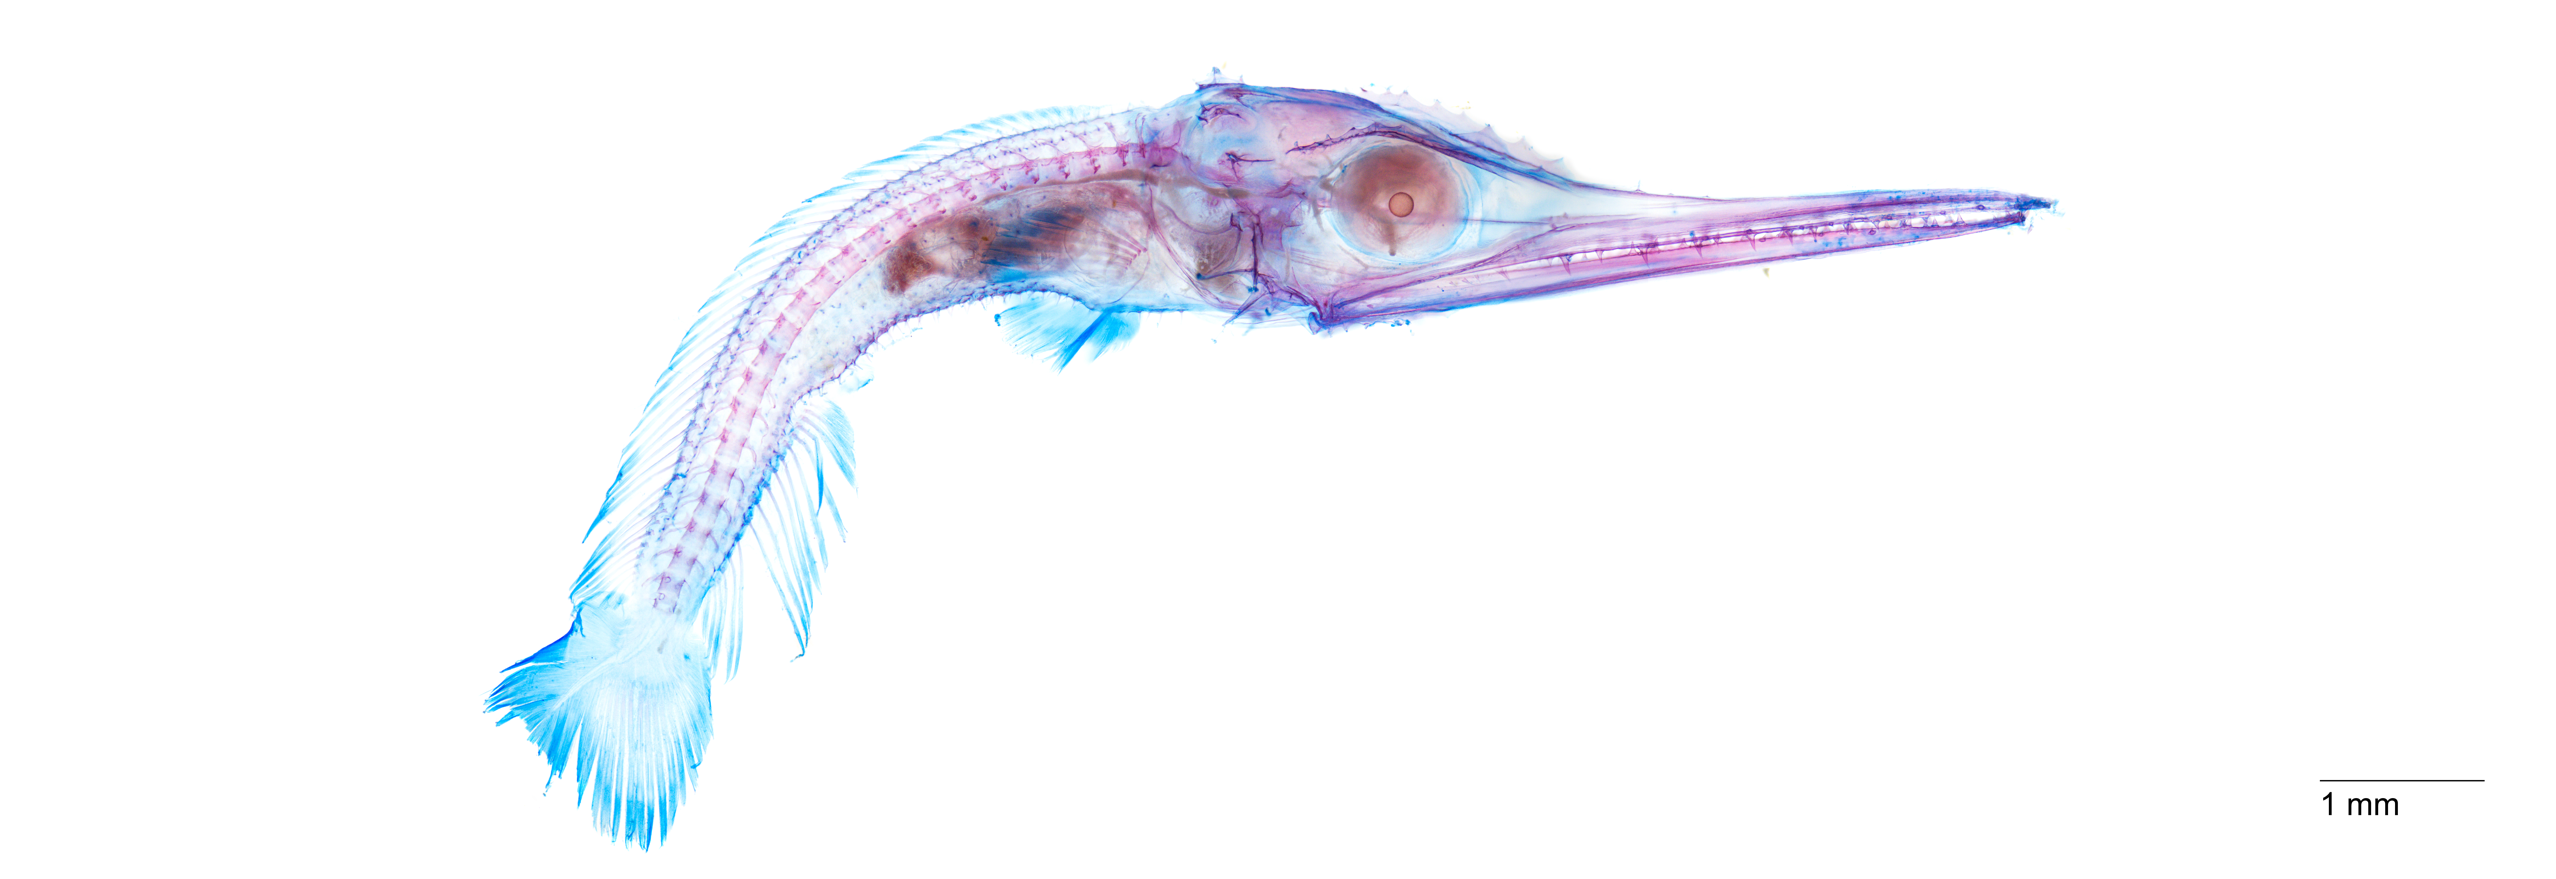 Cleared and stained image of a Swordfish larva. This larva is around 10mm in total length. The bones are stained in red and the cartilage is blue.